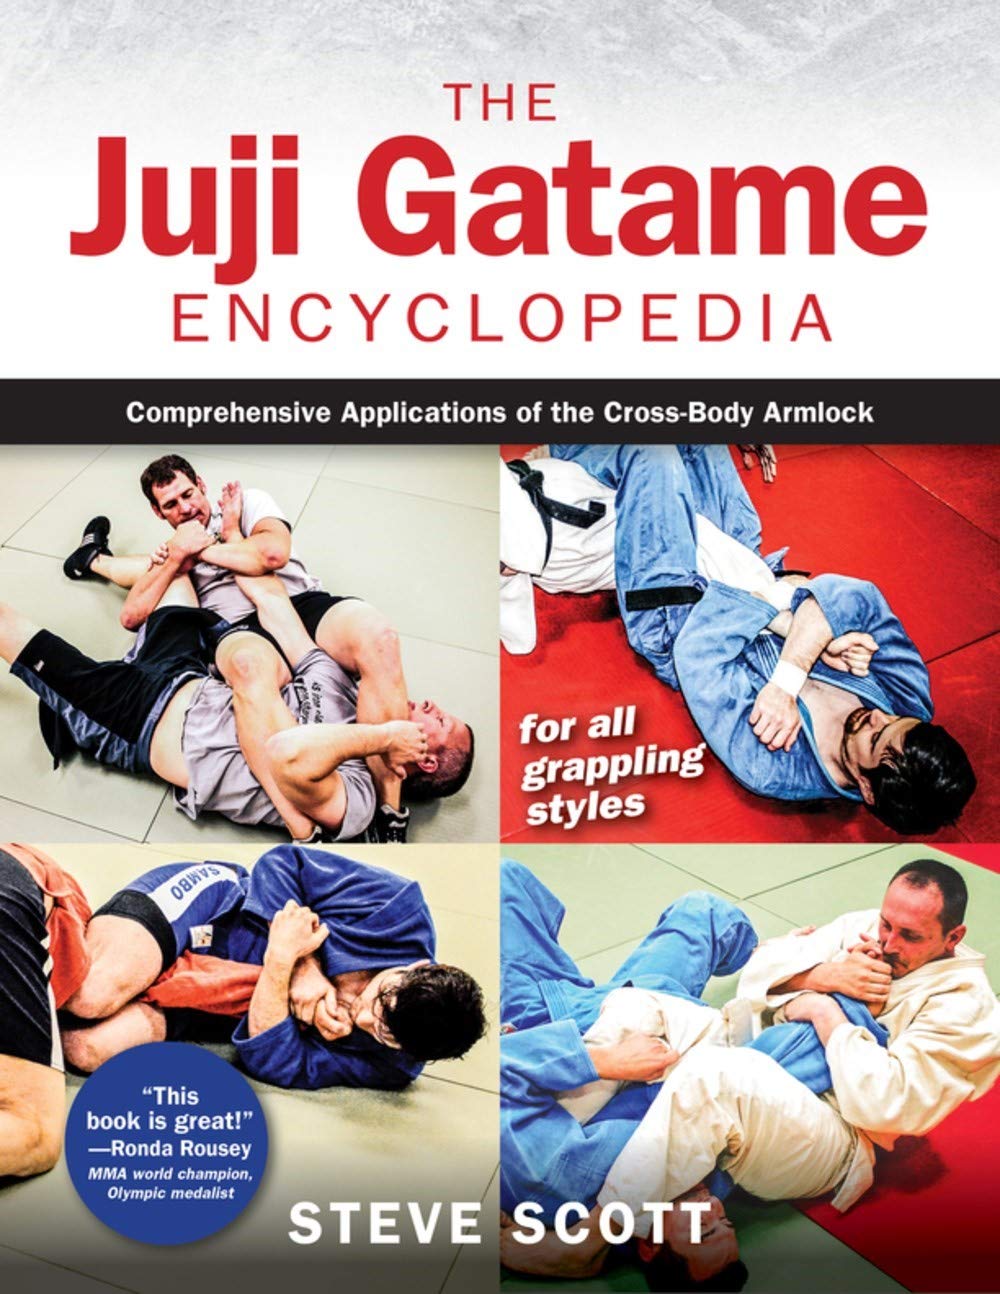 The Juji Gatame Encyclopedia: Comprehensive Applications of the Cross-Body Armlock for all Grappling Styles Book by Steve Scott - Budovideos Inc